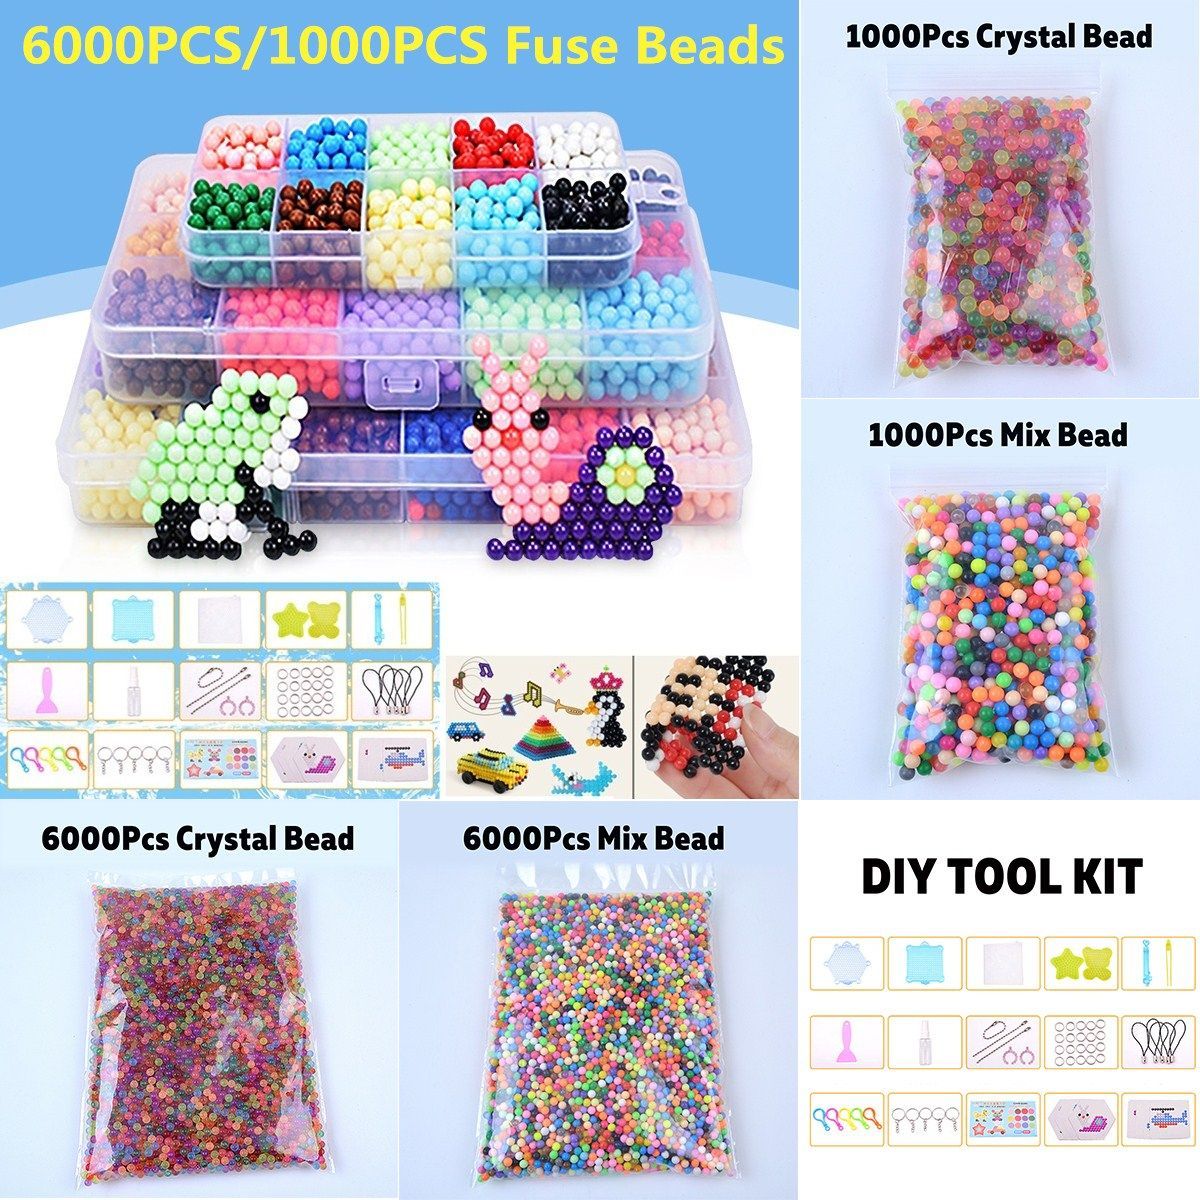 Mix-Crystals-Fuse-Beads-Water-Sticky-Beads-DIY-Refill-Water-Spray-Kid-Art-Craft-1537543